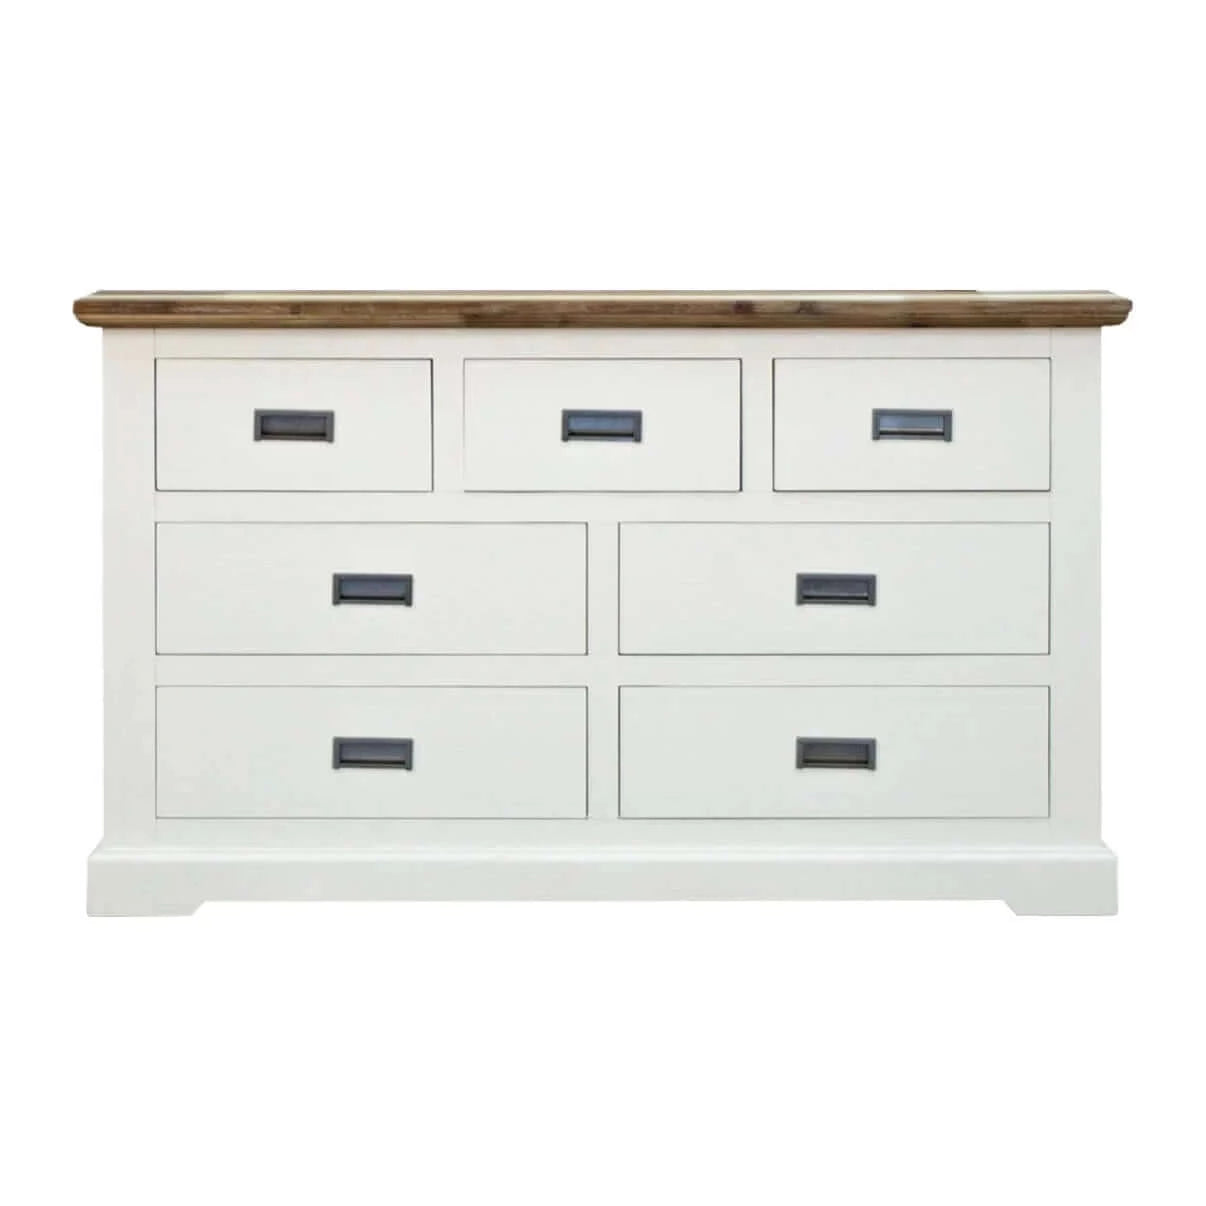 Buy orville dresser 7 chest of drawers solid wood storage cabinet - multi color - upinteriors-Upinteriors